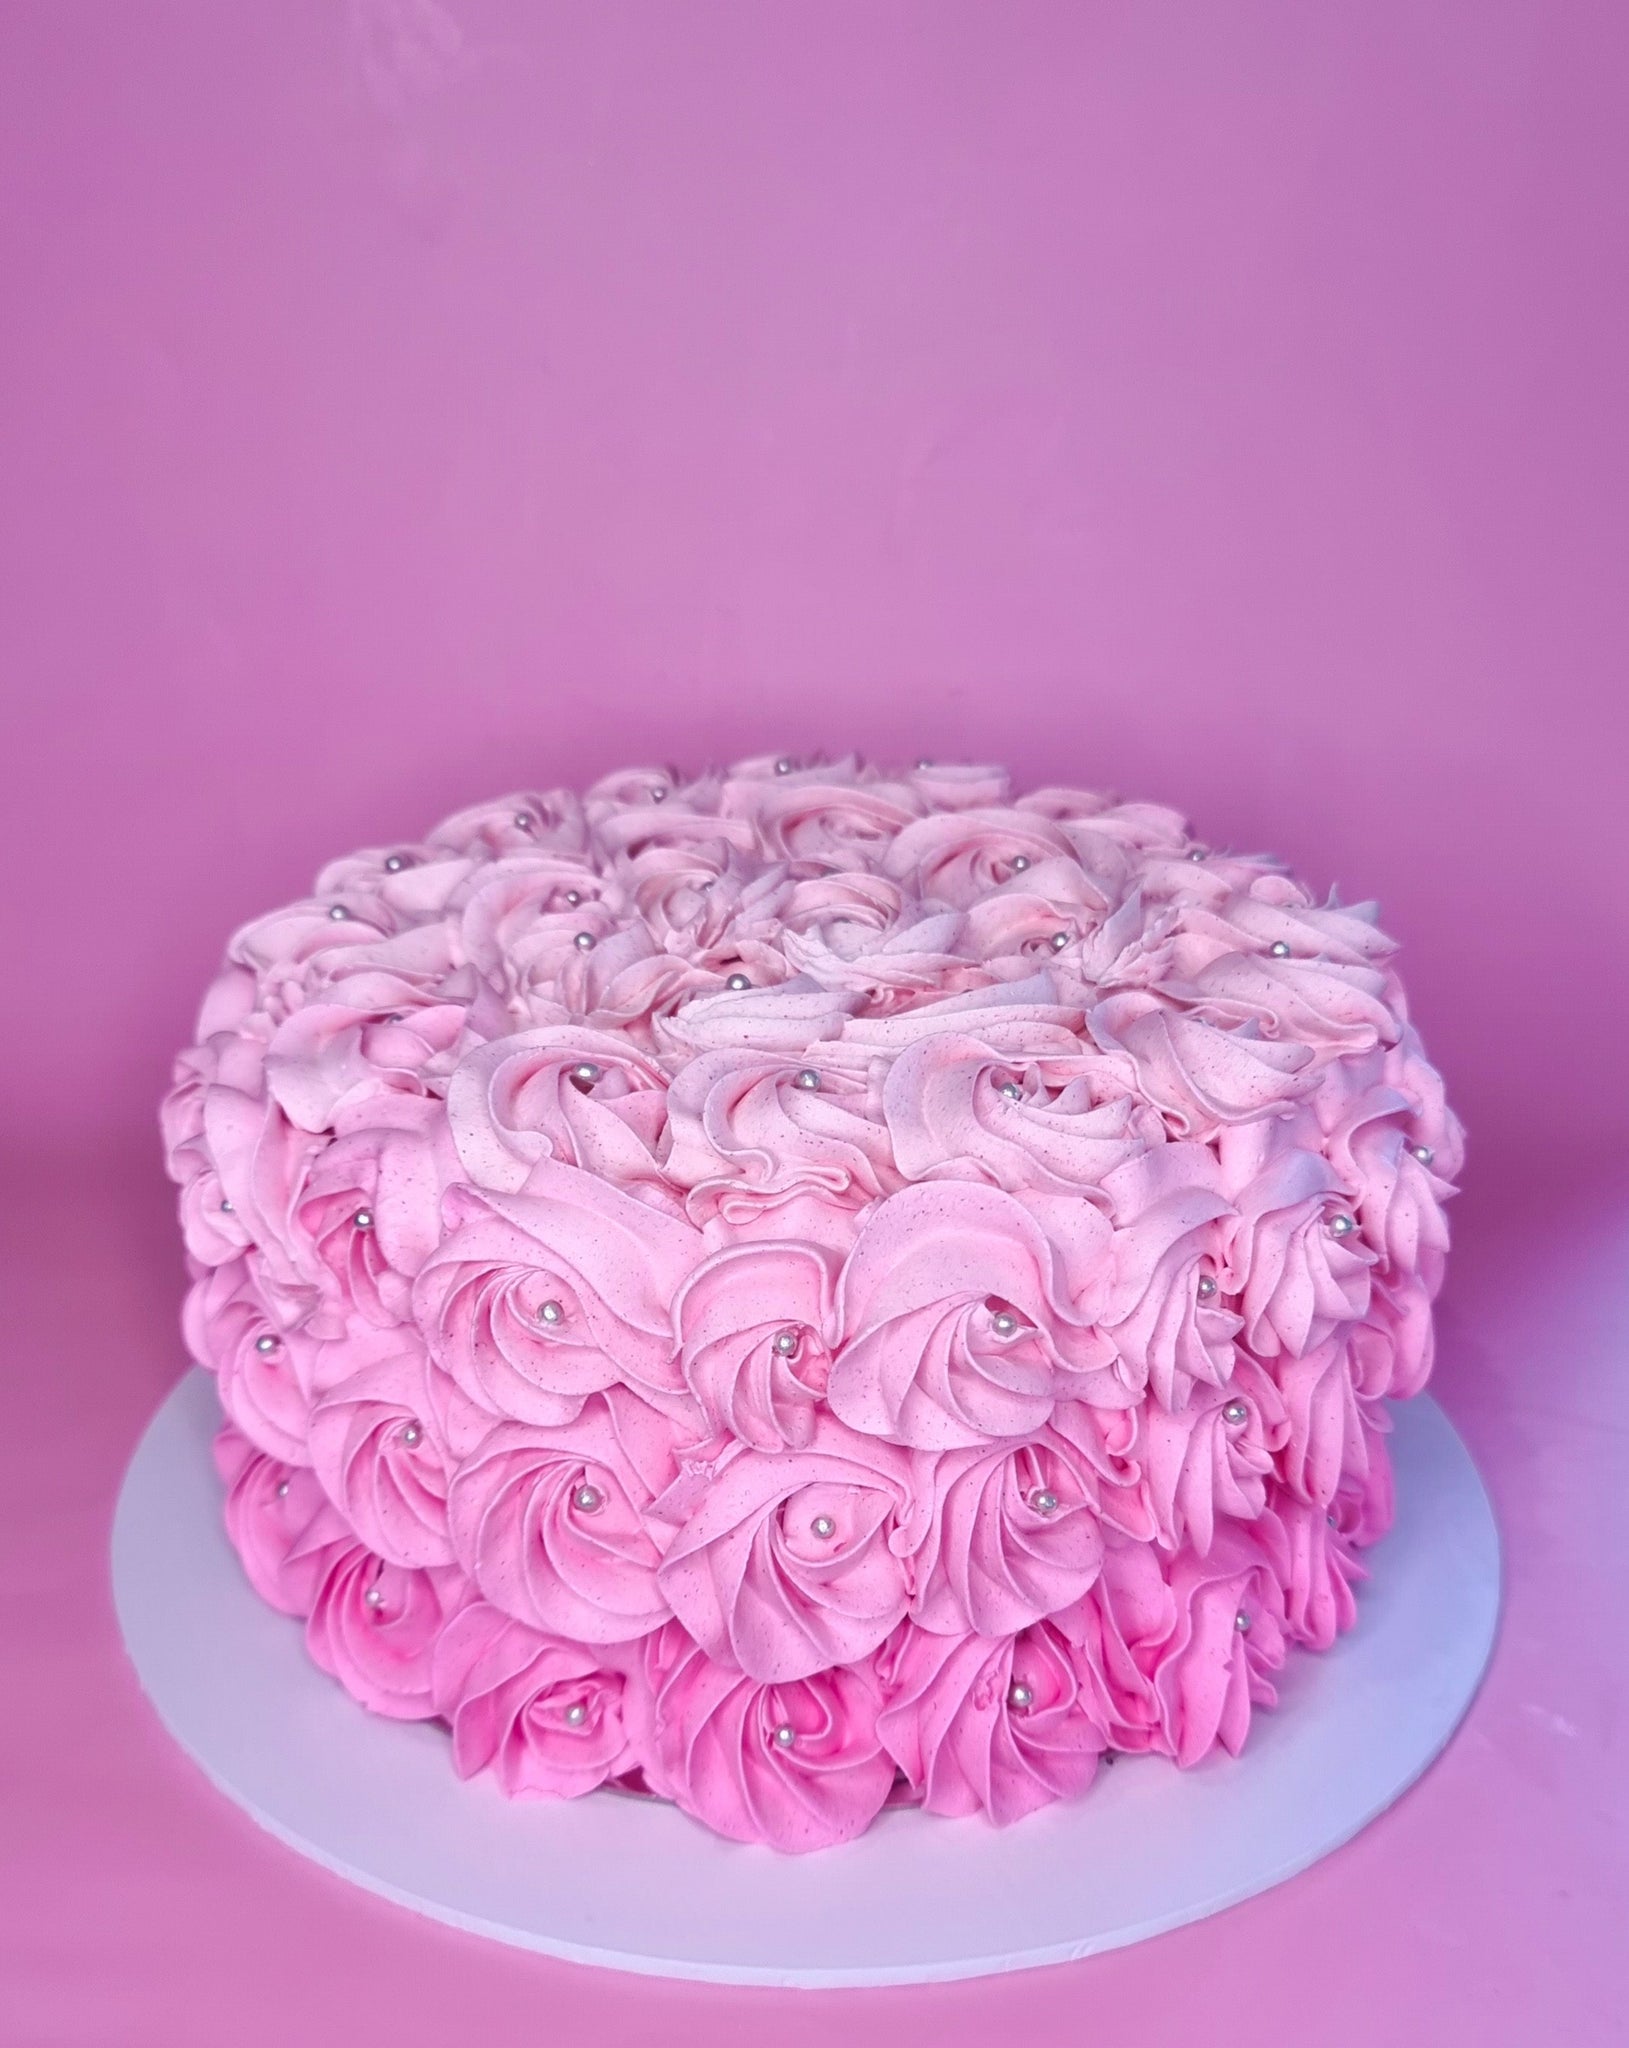 An Ombre Rose Swirl Cake I Made For A Friends Birthday Its A Vanilla Cake  With A Strawberry Cream Filling 4 Layers With Each Layer Match -  CakeCentral.com